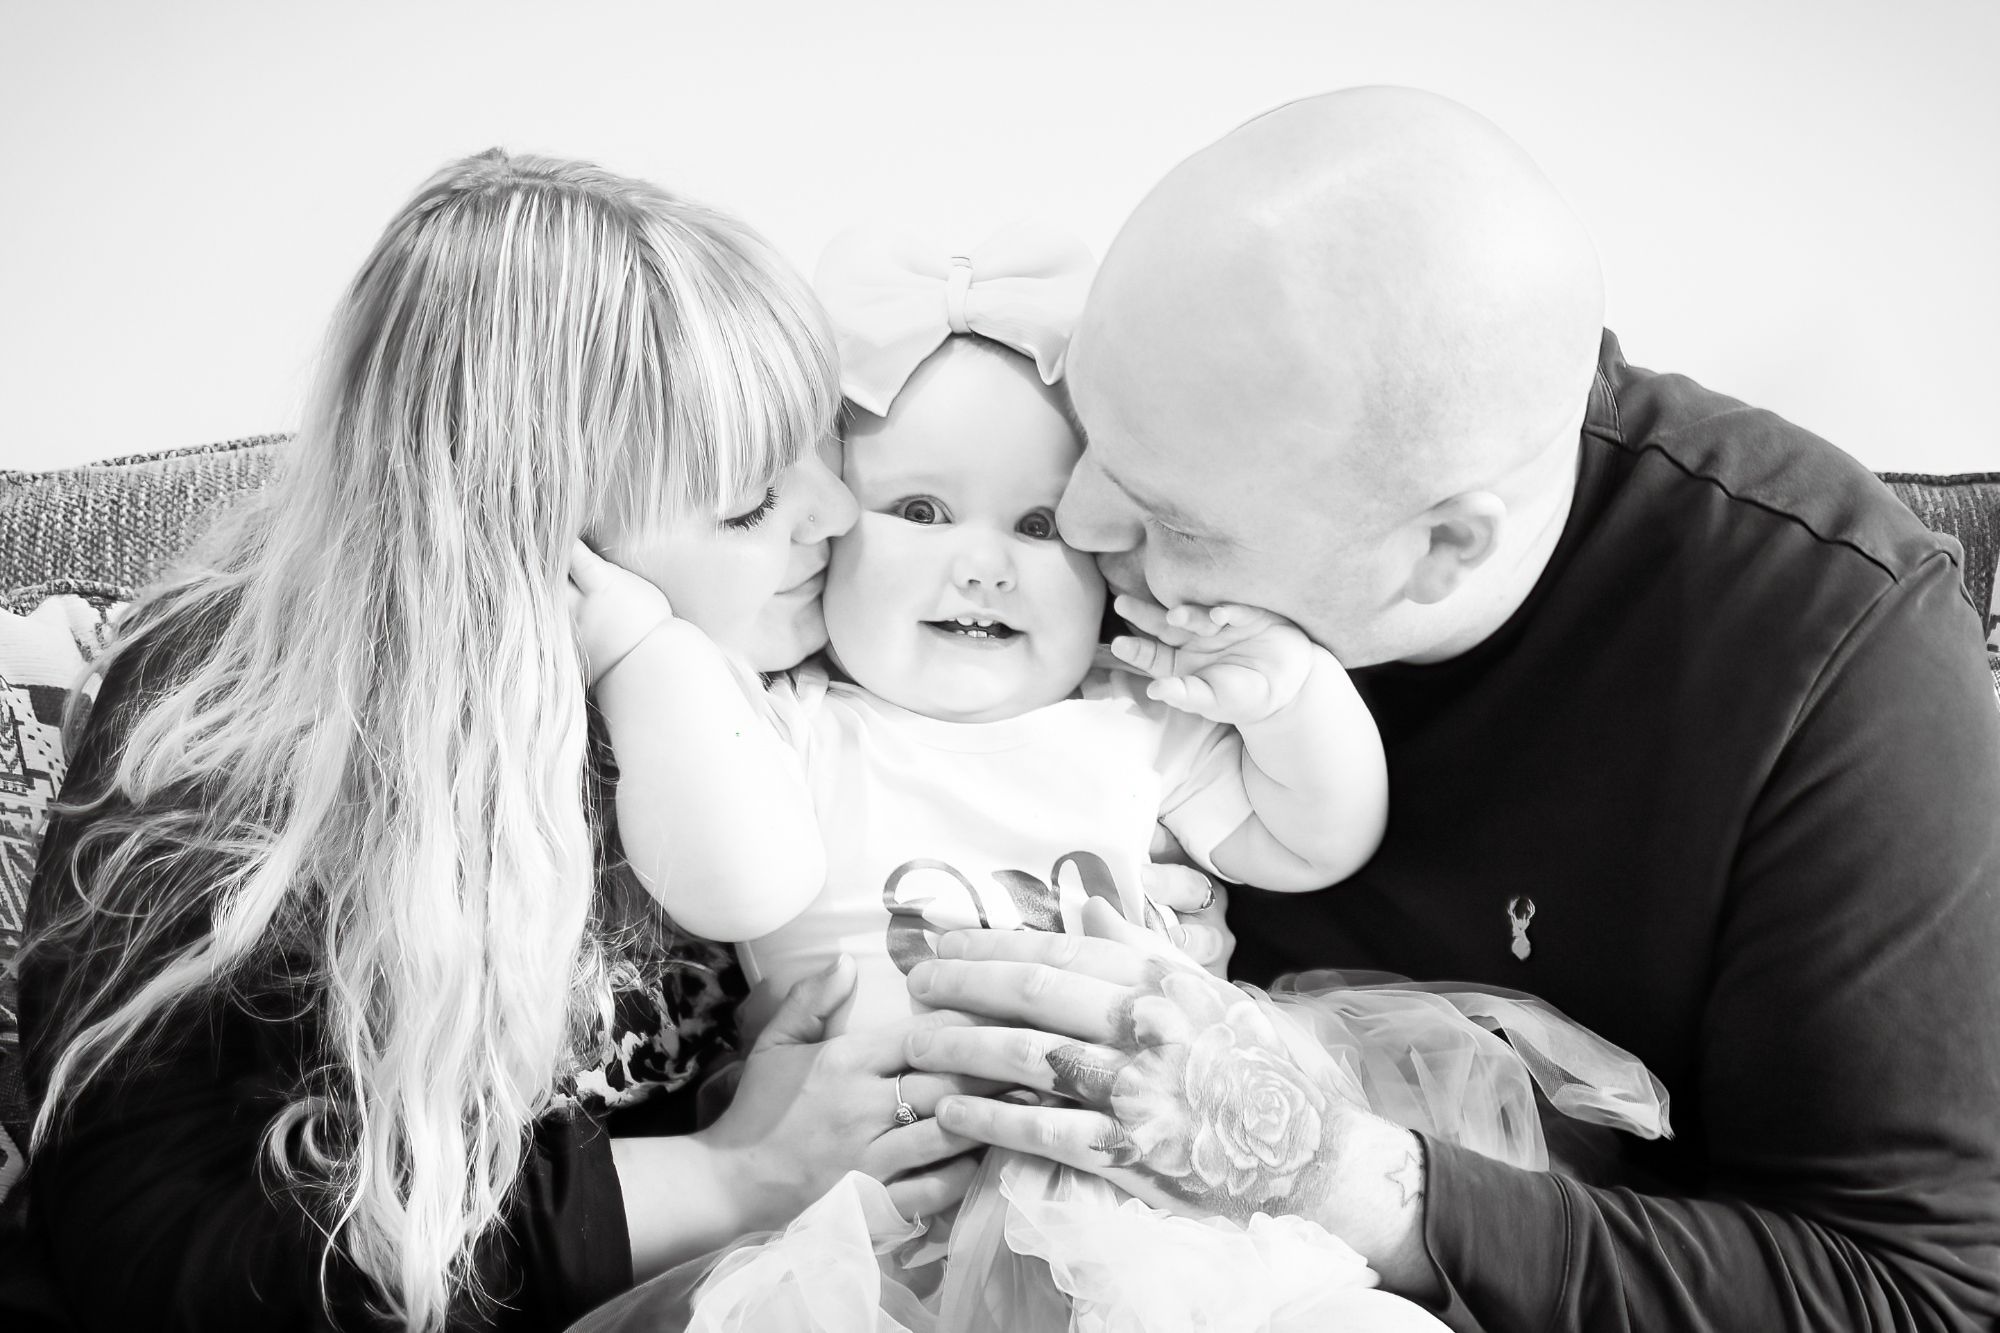 A proud Mum and Dad cuddle and kiss their daughter on her cheeks as they celebrate her first birthday at home